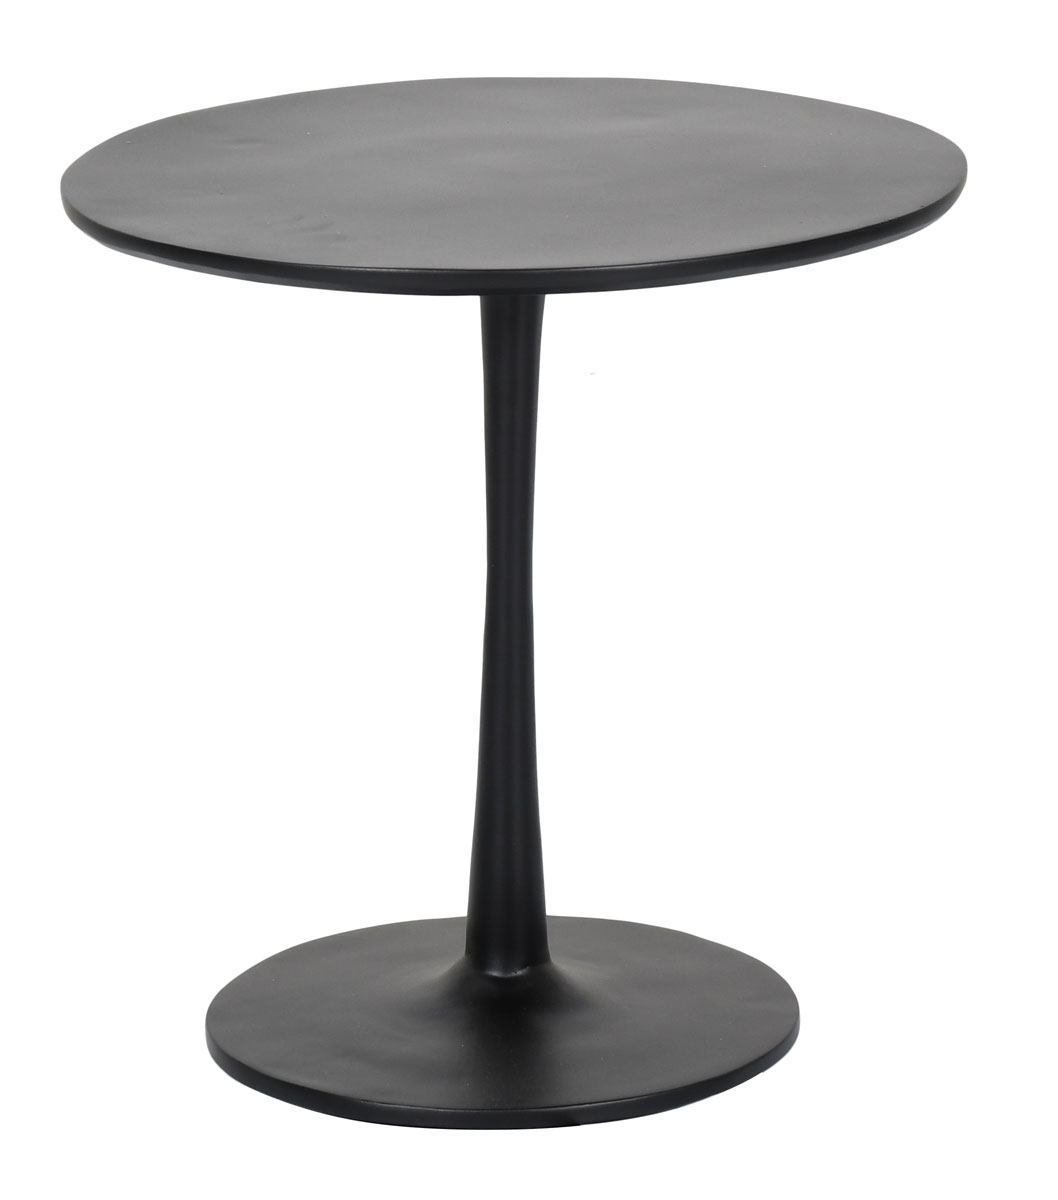 Castelle Tulip 20 inch Occasional Table